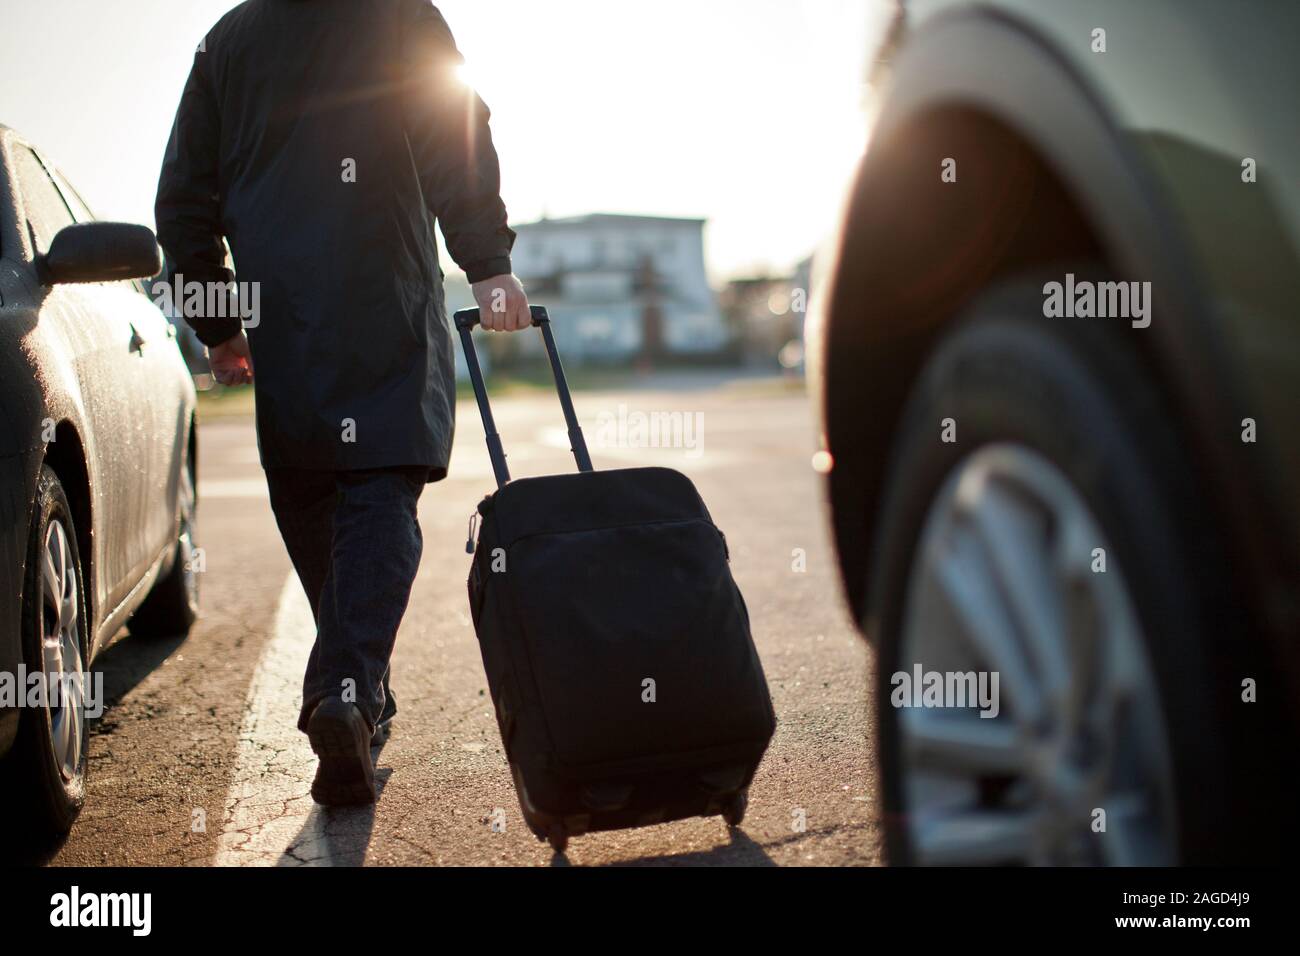 Suitcase on wheels being pulled across a parking lot by a mid adult man. Stock Photo